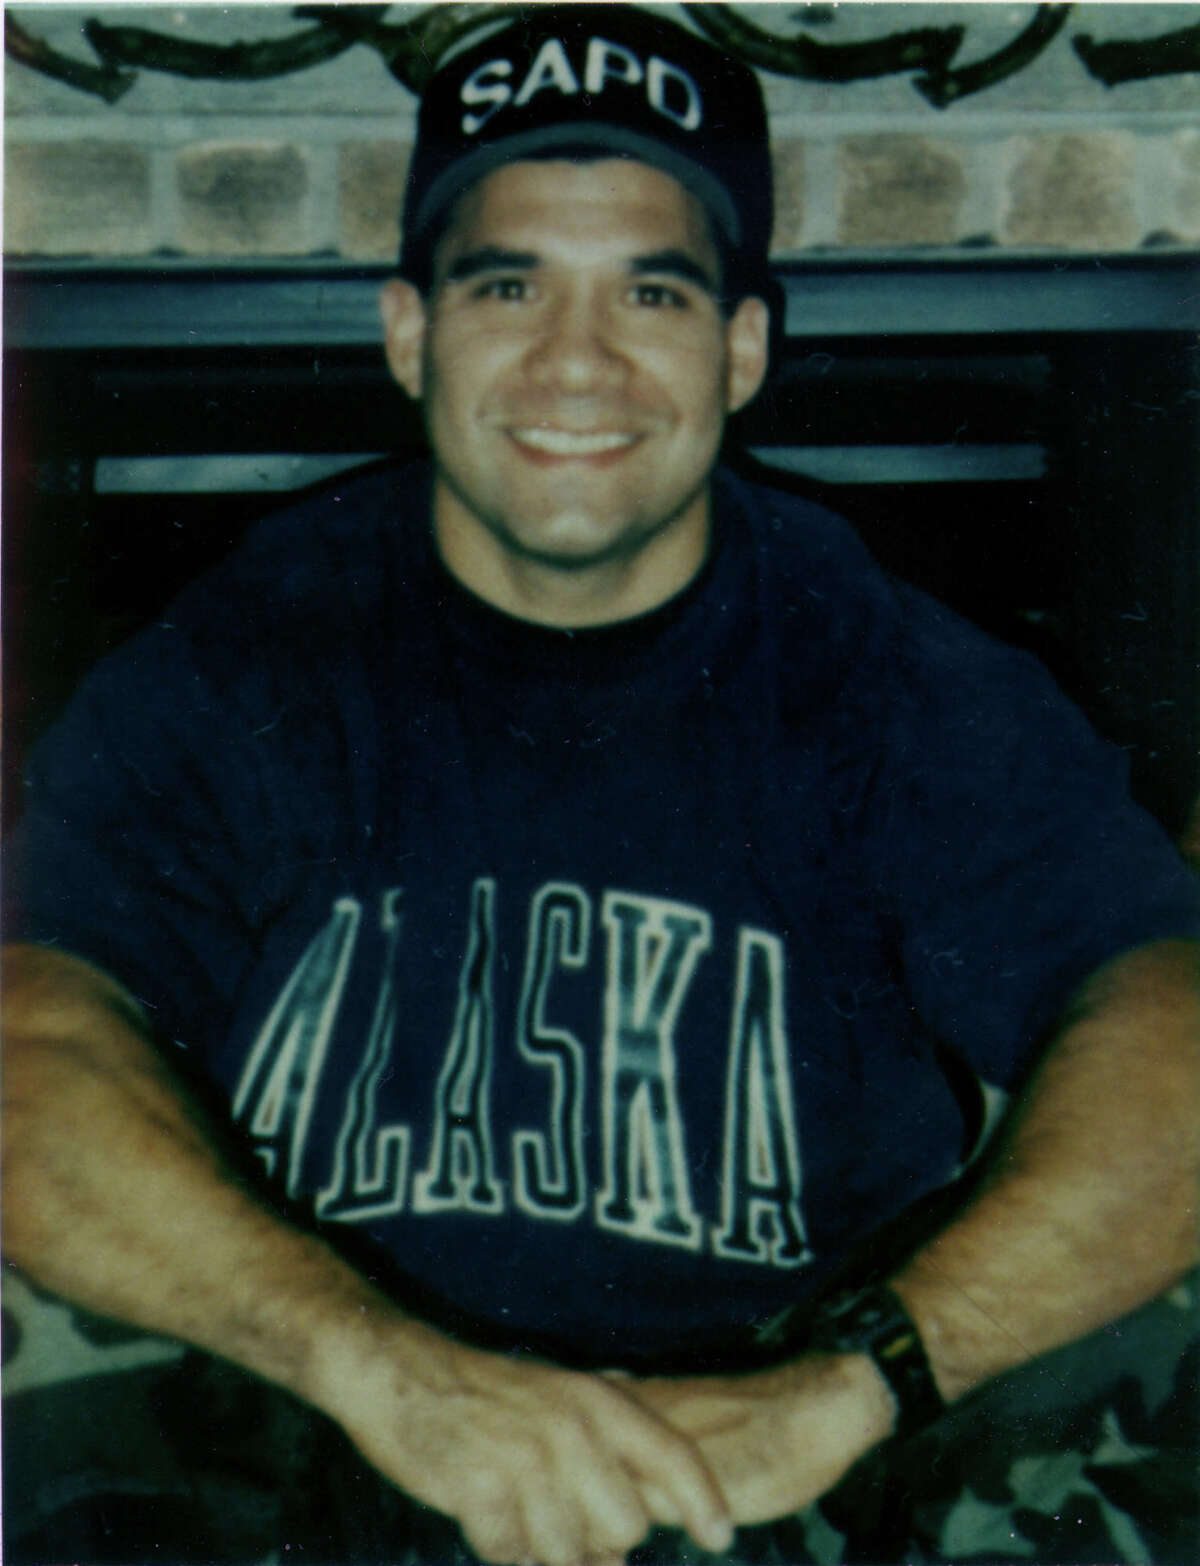 Officer John Riojas, 37, affectionately known as "Rocky" within the department, was pronounced dead at 12:07 a.m. Feb. 3 after his family made the decision to take him off life support, Police Chief Al Philippus told the Express-News in 2001.